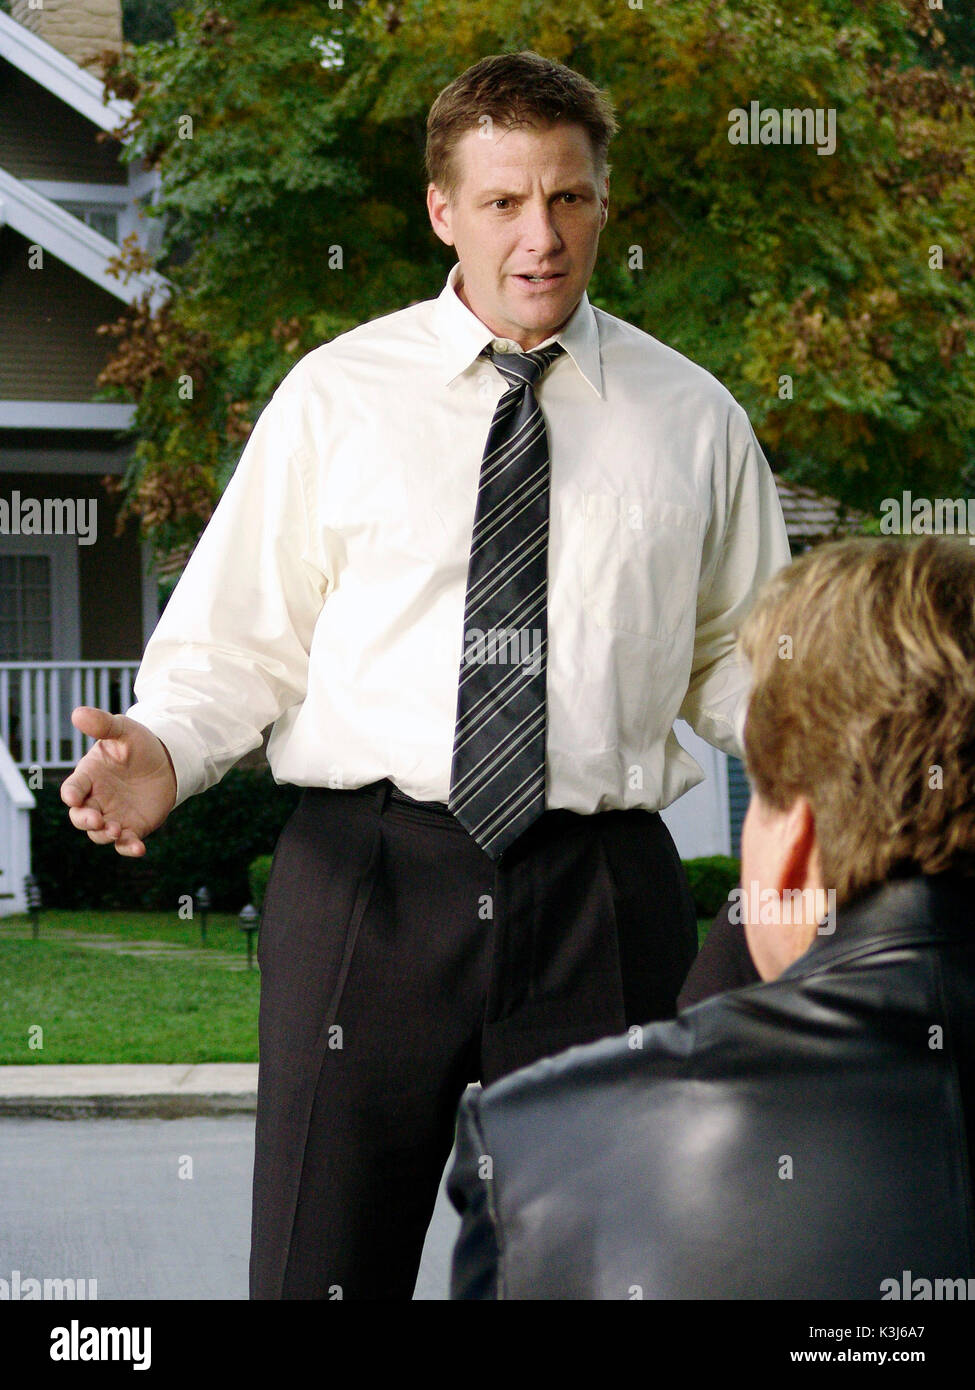 DESPERATE HOUSEWIVES   [US TV SERIES 2004 - ]  Series#1/Episode#13/Your Fault   DOUG SAVANT as Tom Scavo,  RYAN O'NEAL as Rodney Scavo DESPERATE HOUSEWIVES Stock Photo